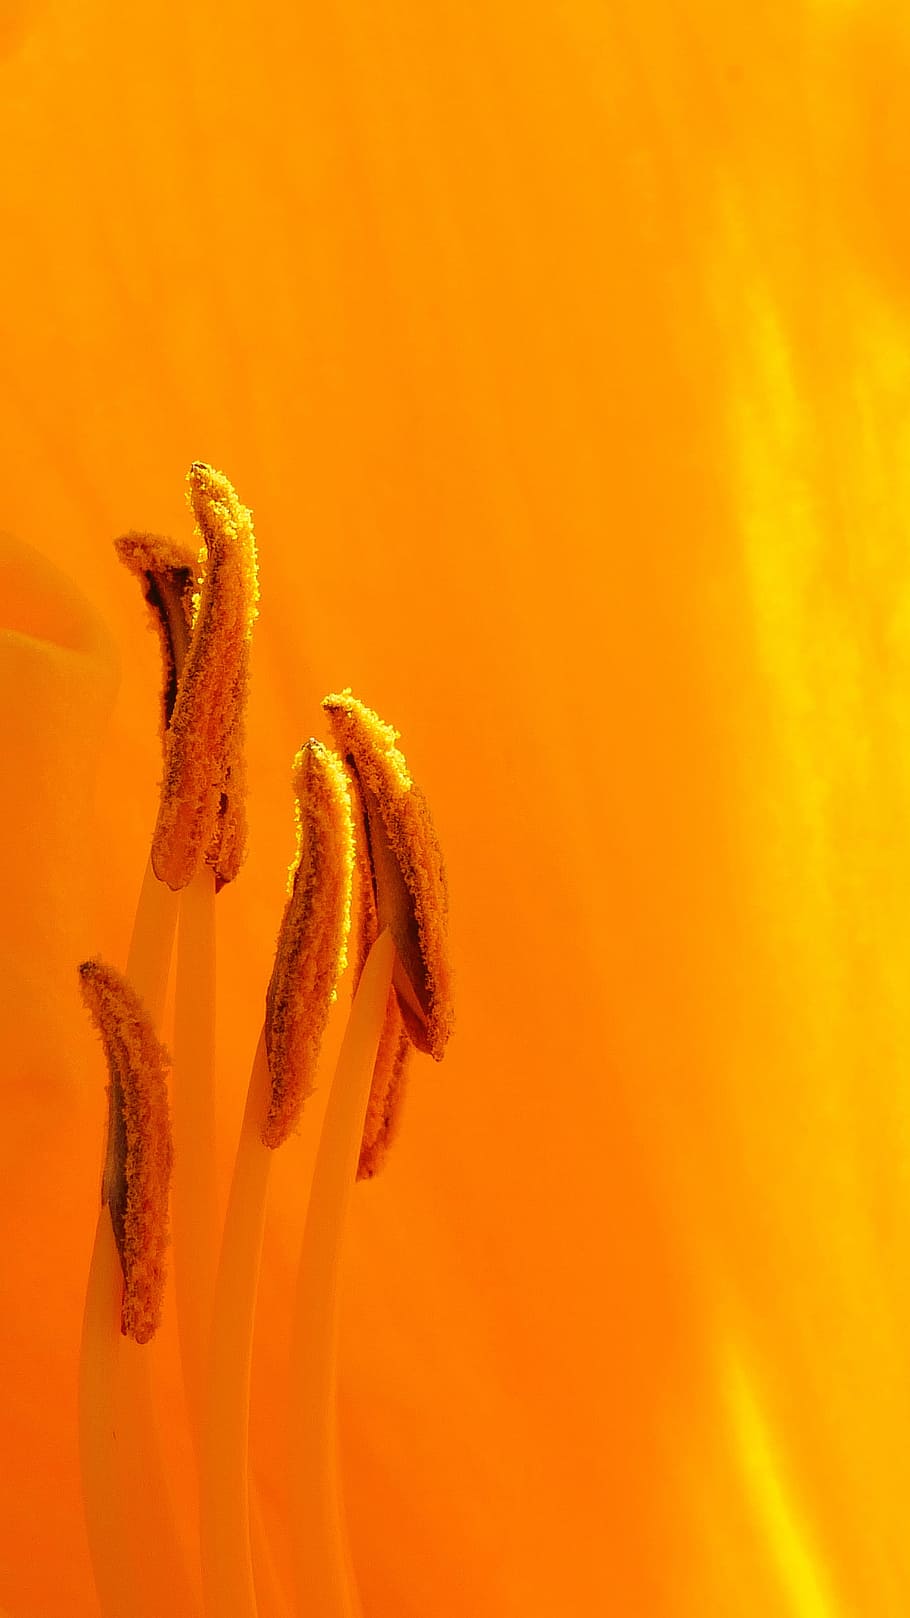 orange, daylily flower parts macro, summer time, rutgers garden nj usa, macro photography, close-up, extreme close-up, flower images, pistil picture, picture of flowers